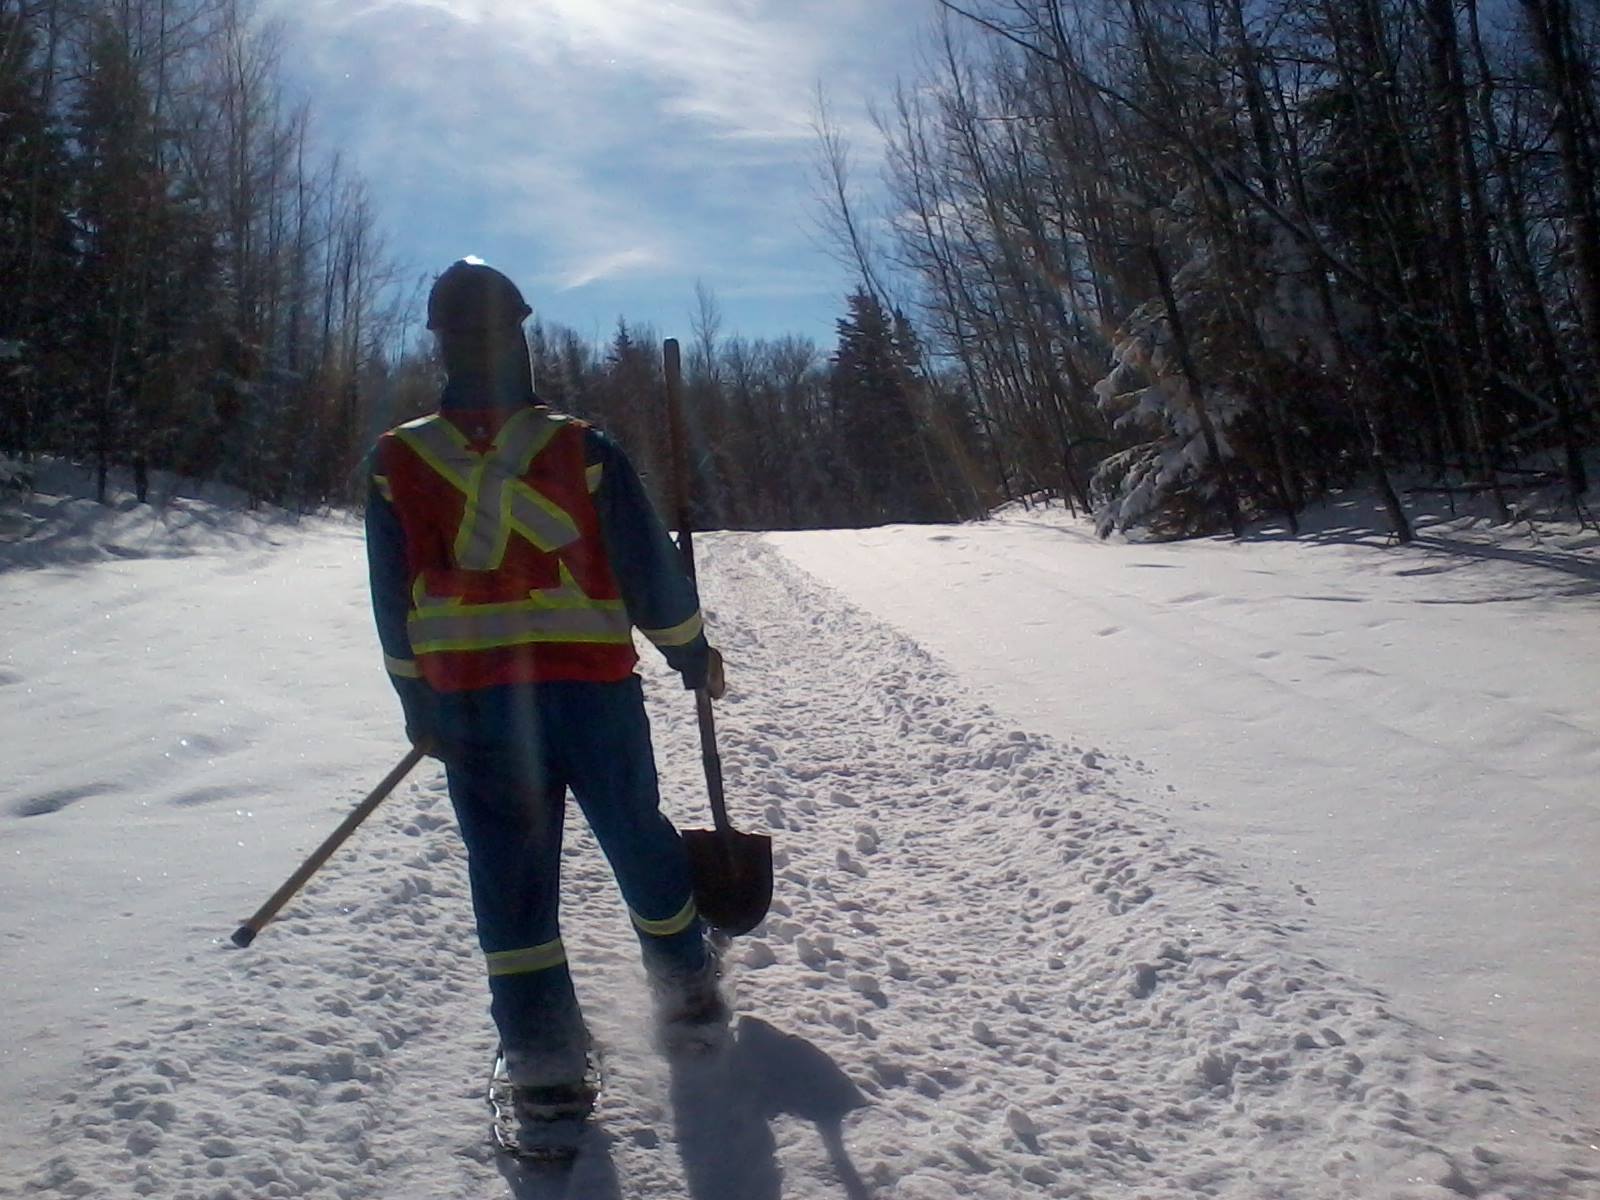 Working in snowshoes